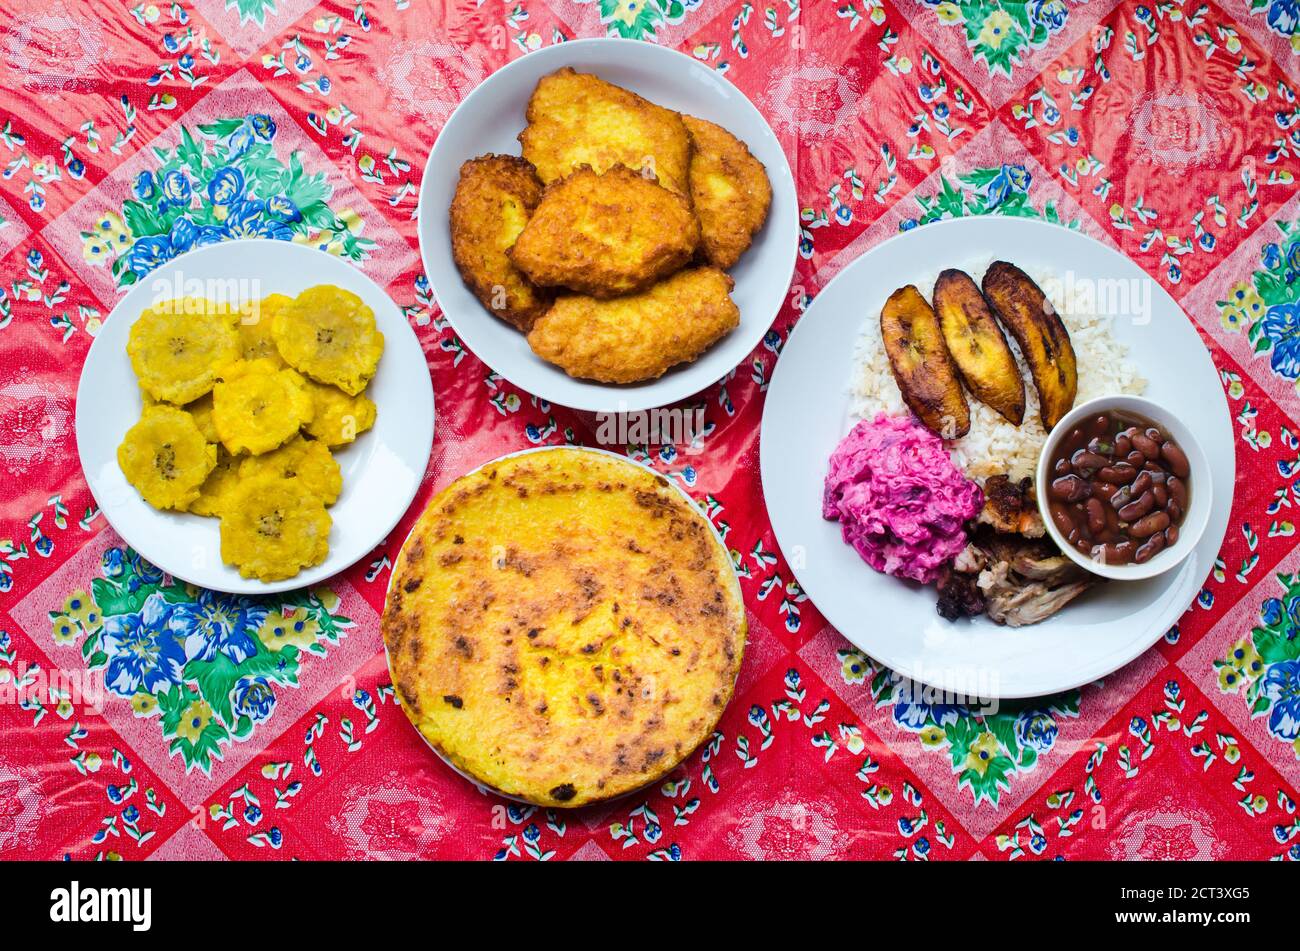 Variety of Panamanian traditional foods Stock Photo